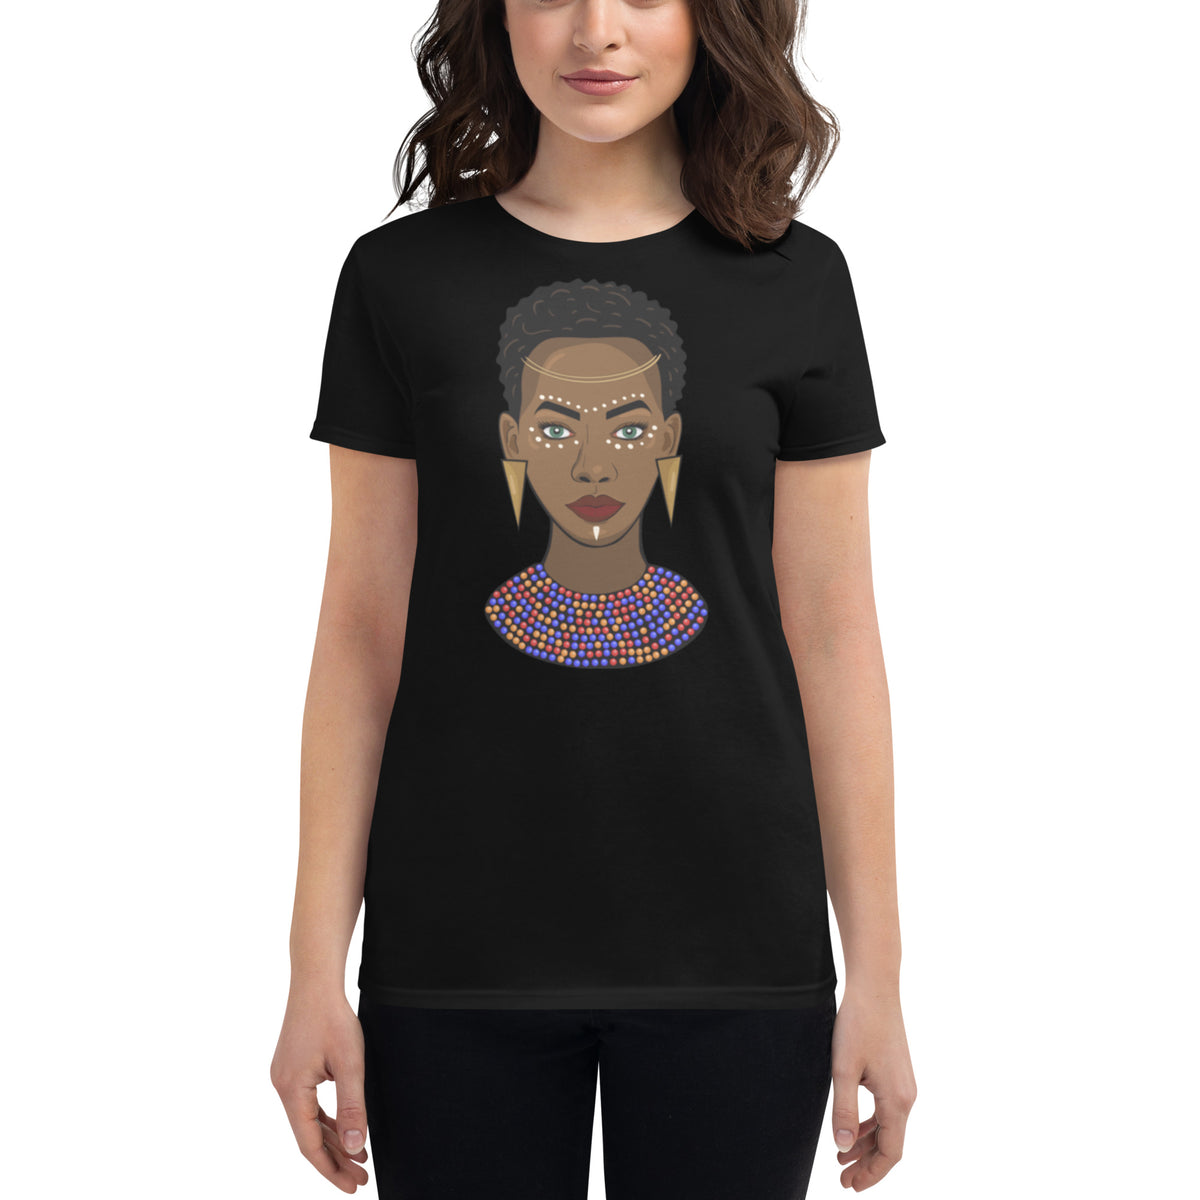 Rosy Brown Women's Fashion Fit t-shirt Queen Nefertiti Edition Sumbu_African_Prints_and_Designs